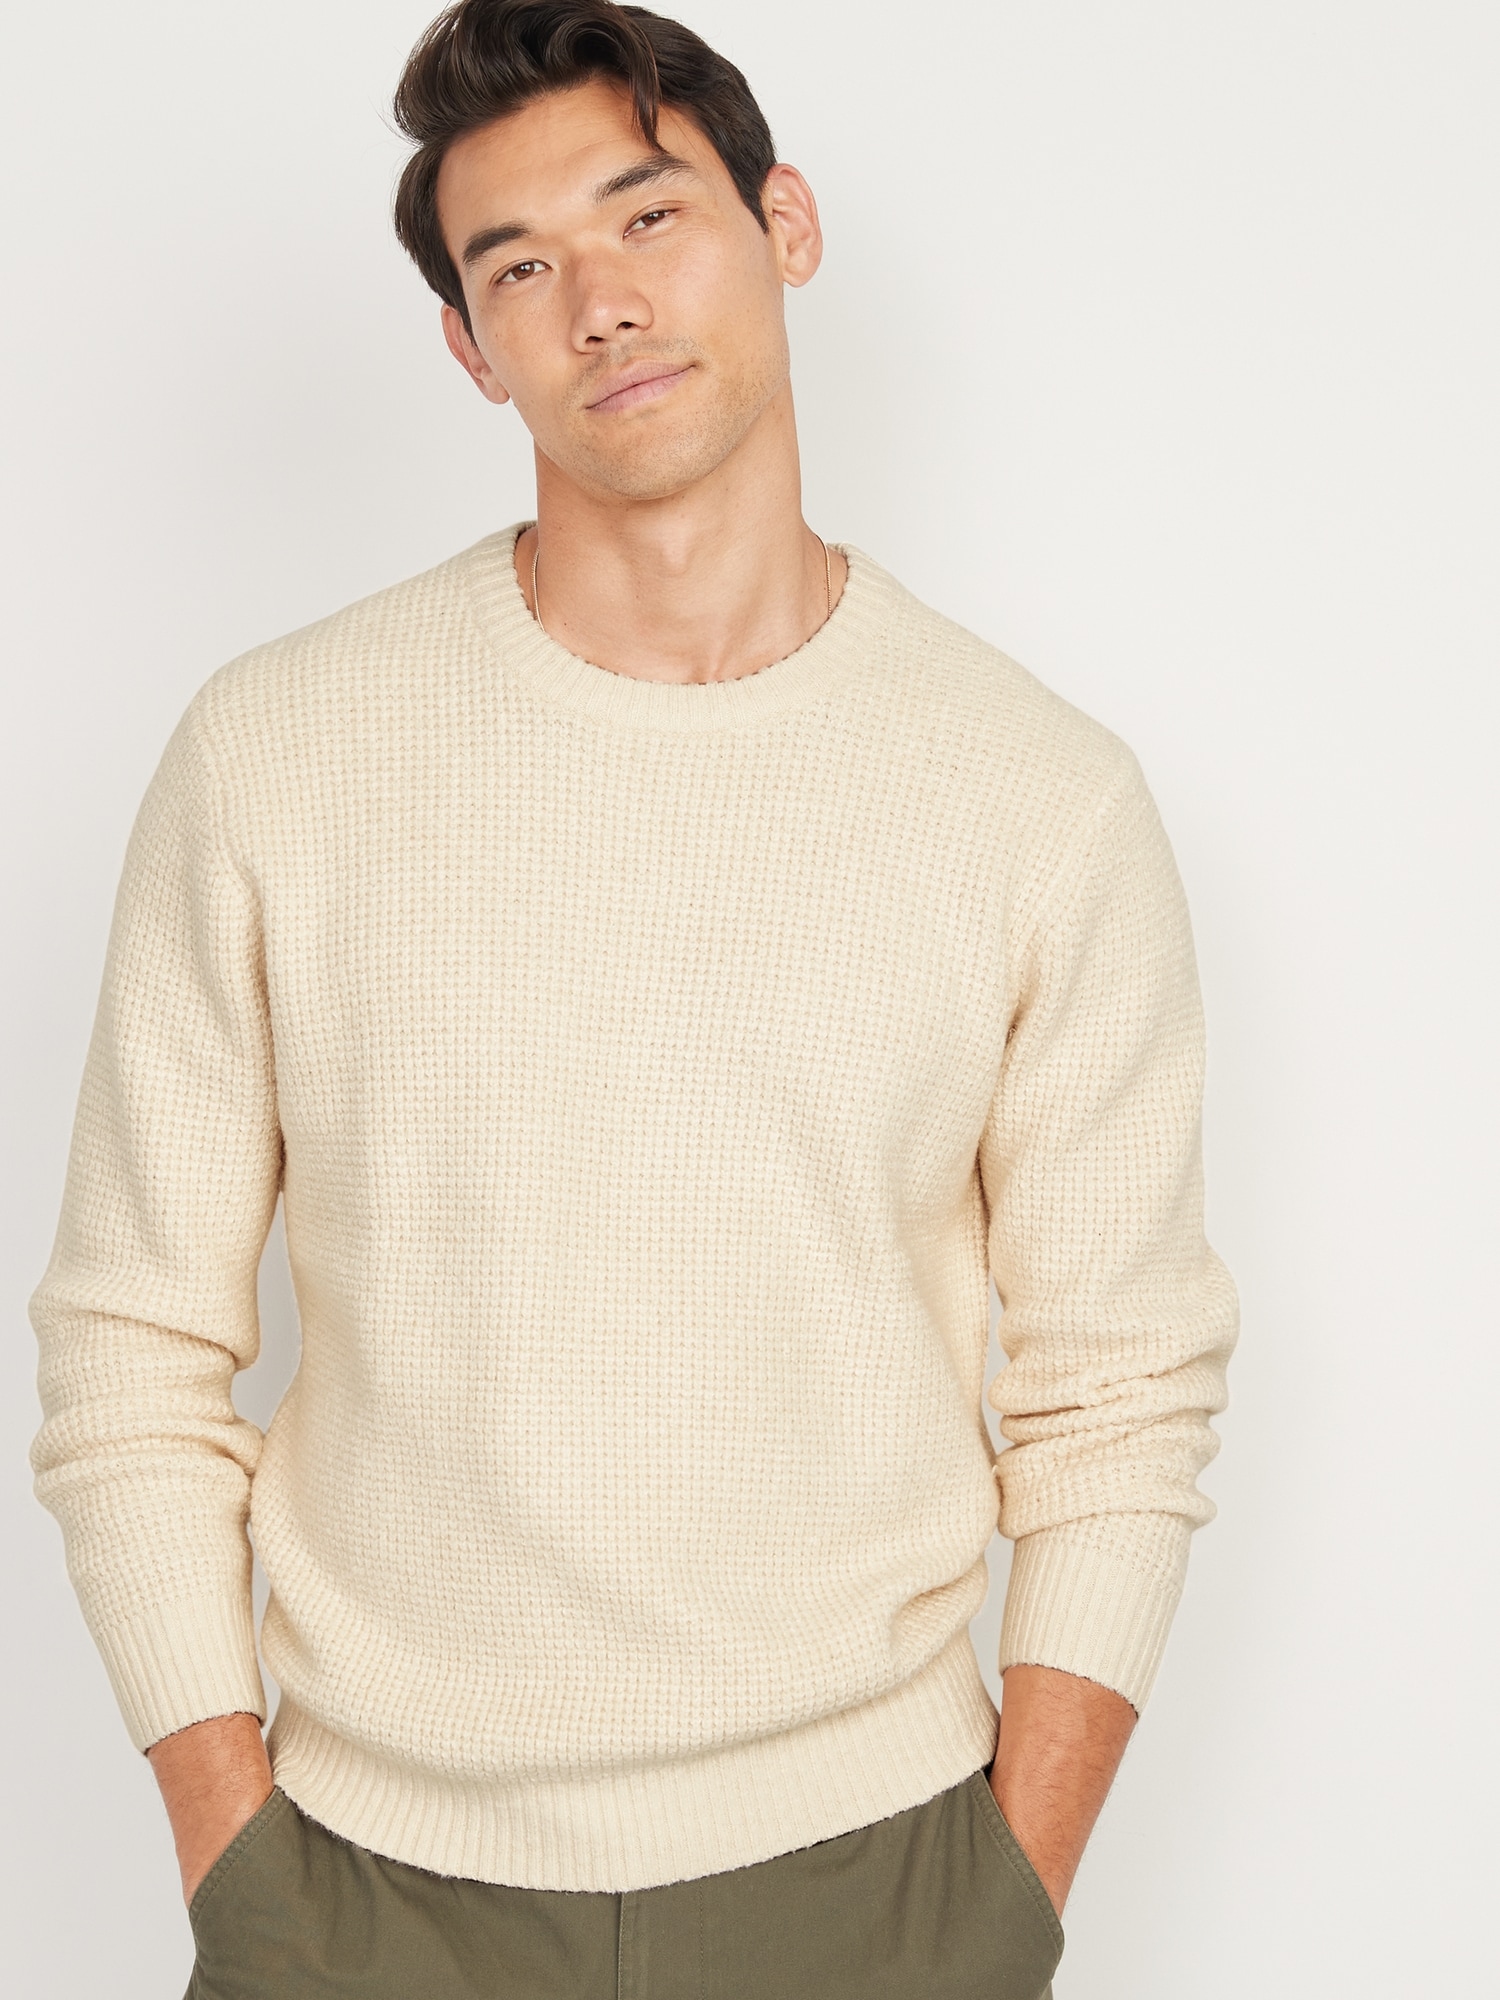 Textured Waffle-Knit Crew-Neck Sweater for Men | Old Navy